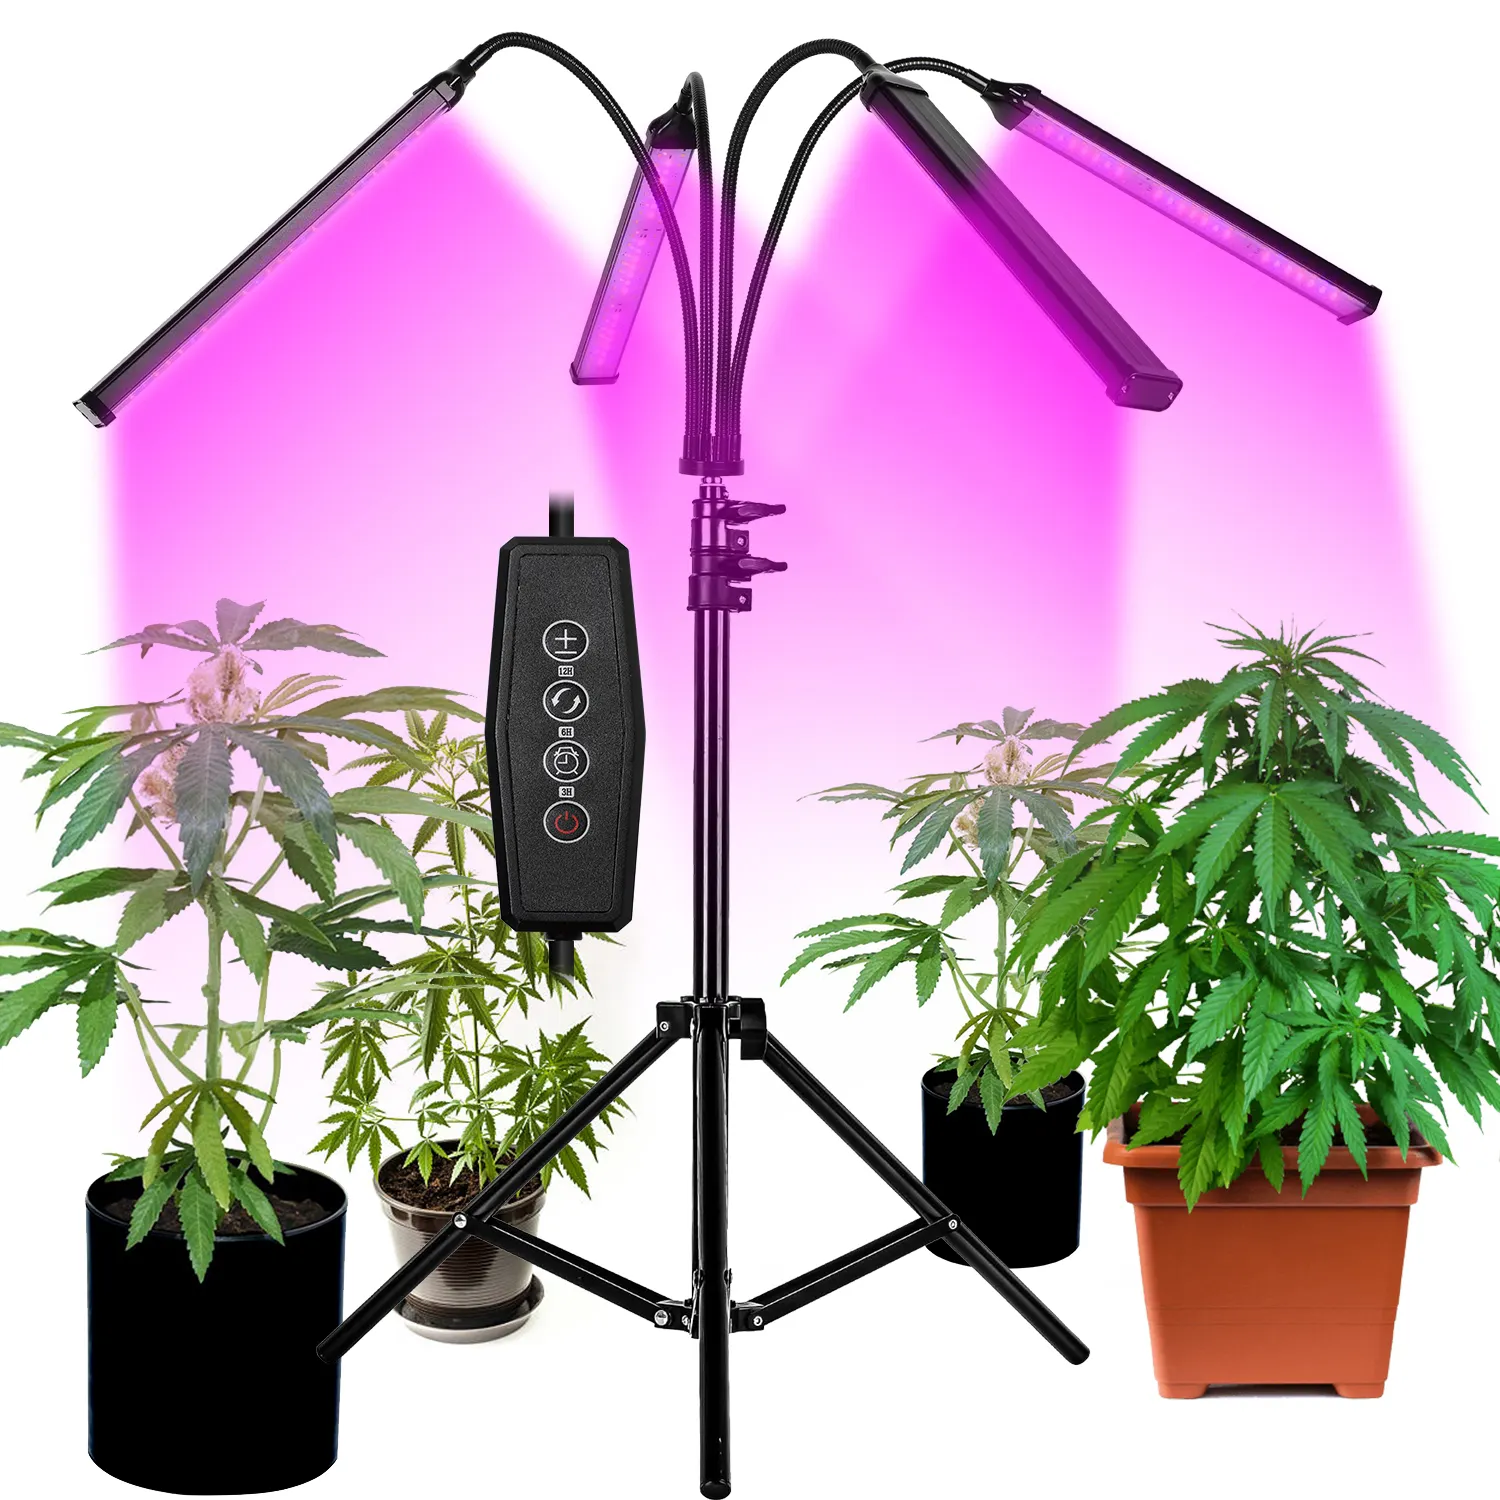 led grow light plant 4 Head Timing 9 Dimmable Levels 120W LED Grow Lights for 4x4 Grow Tent Full Spectrum Phytolamp